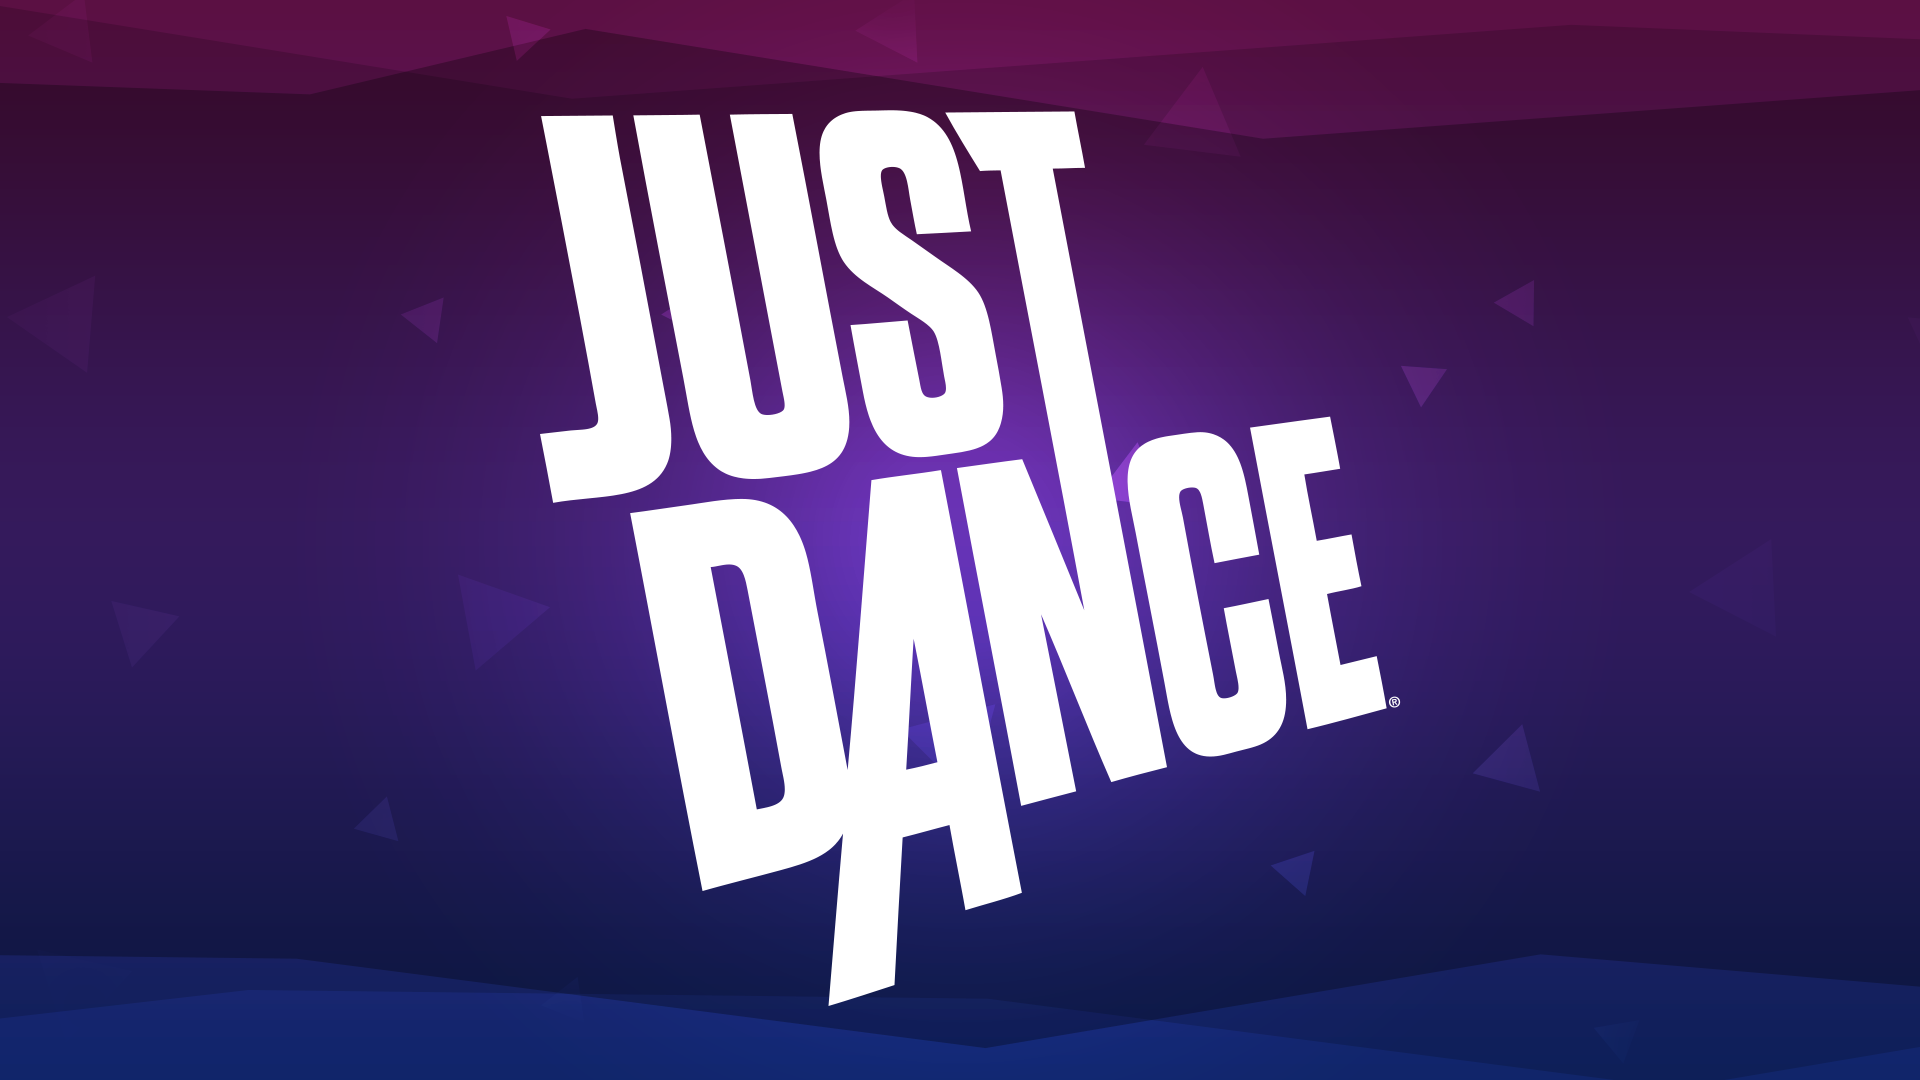 Welcome to Just Dance 2017!